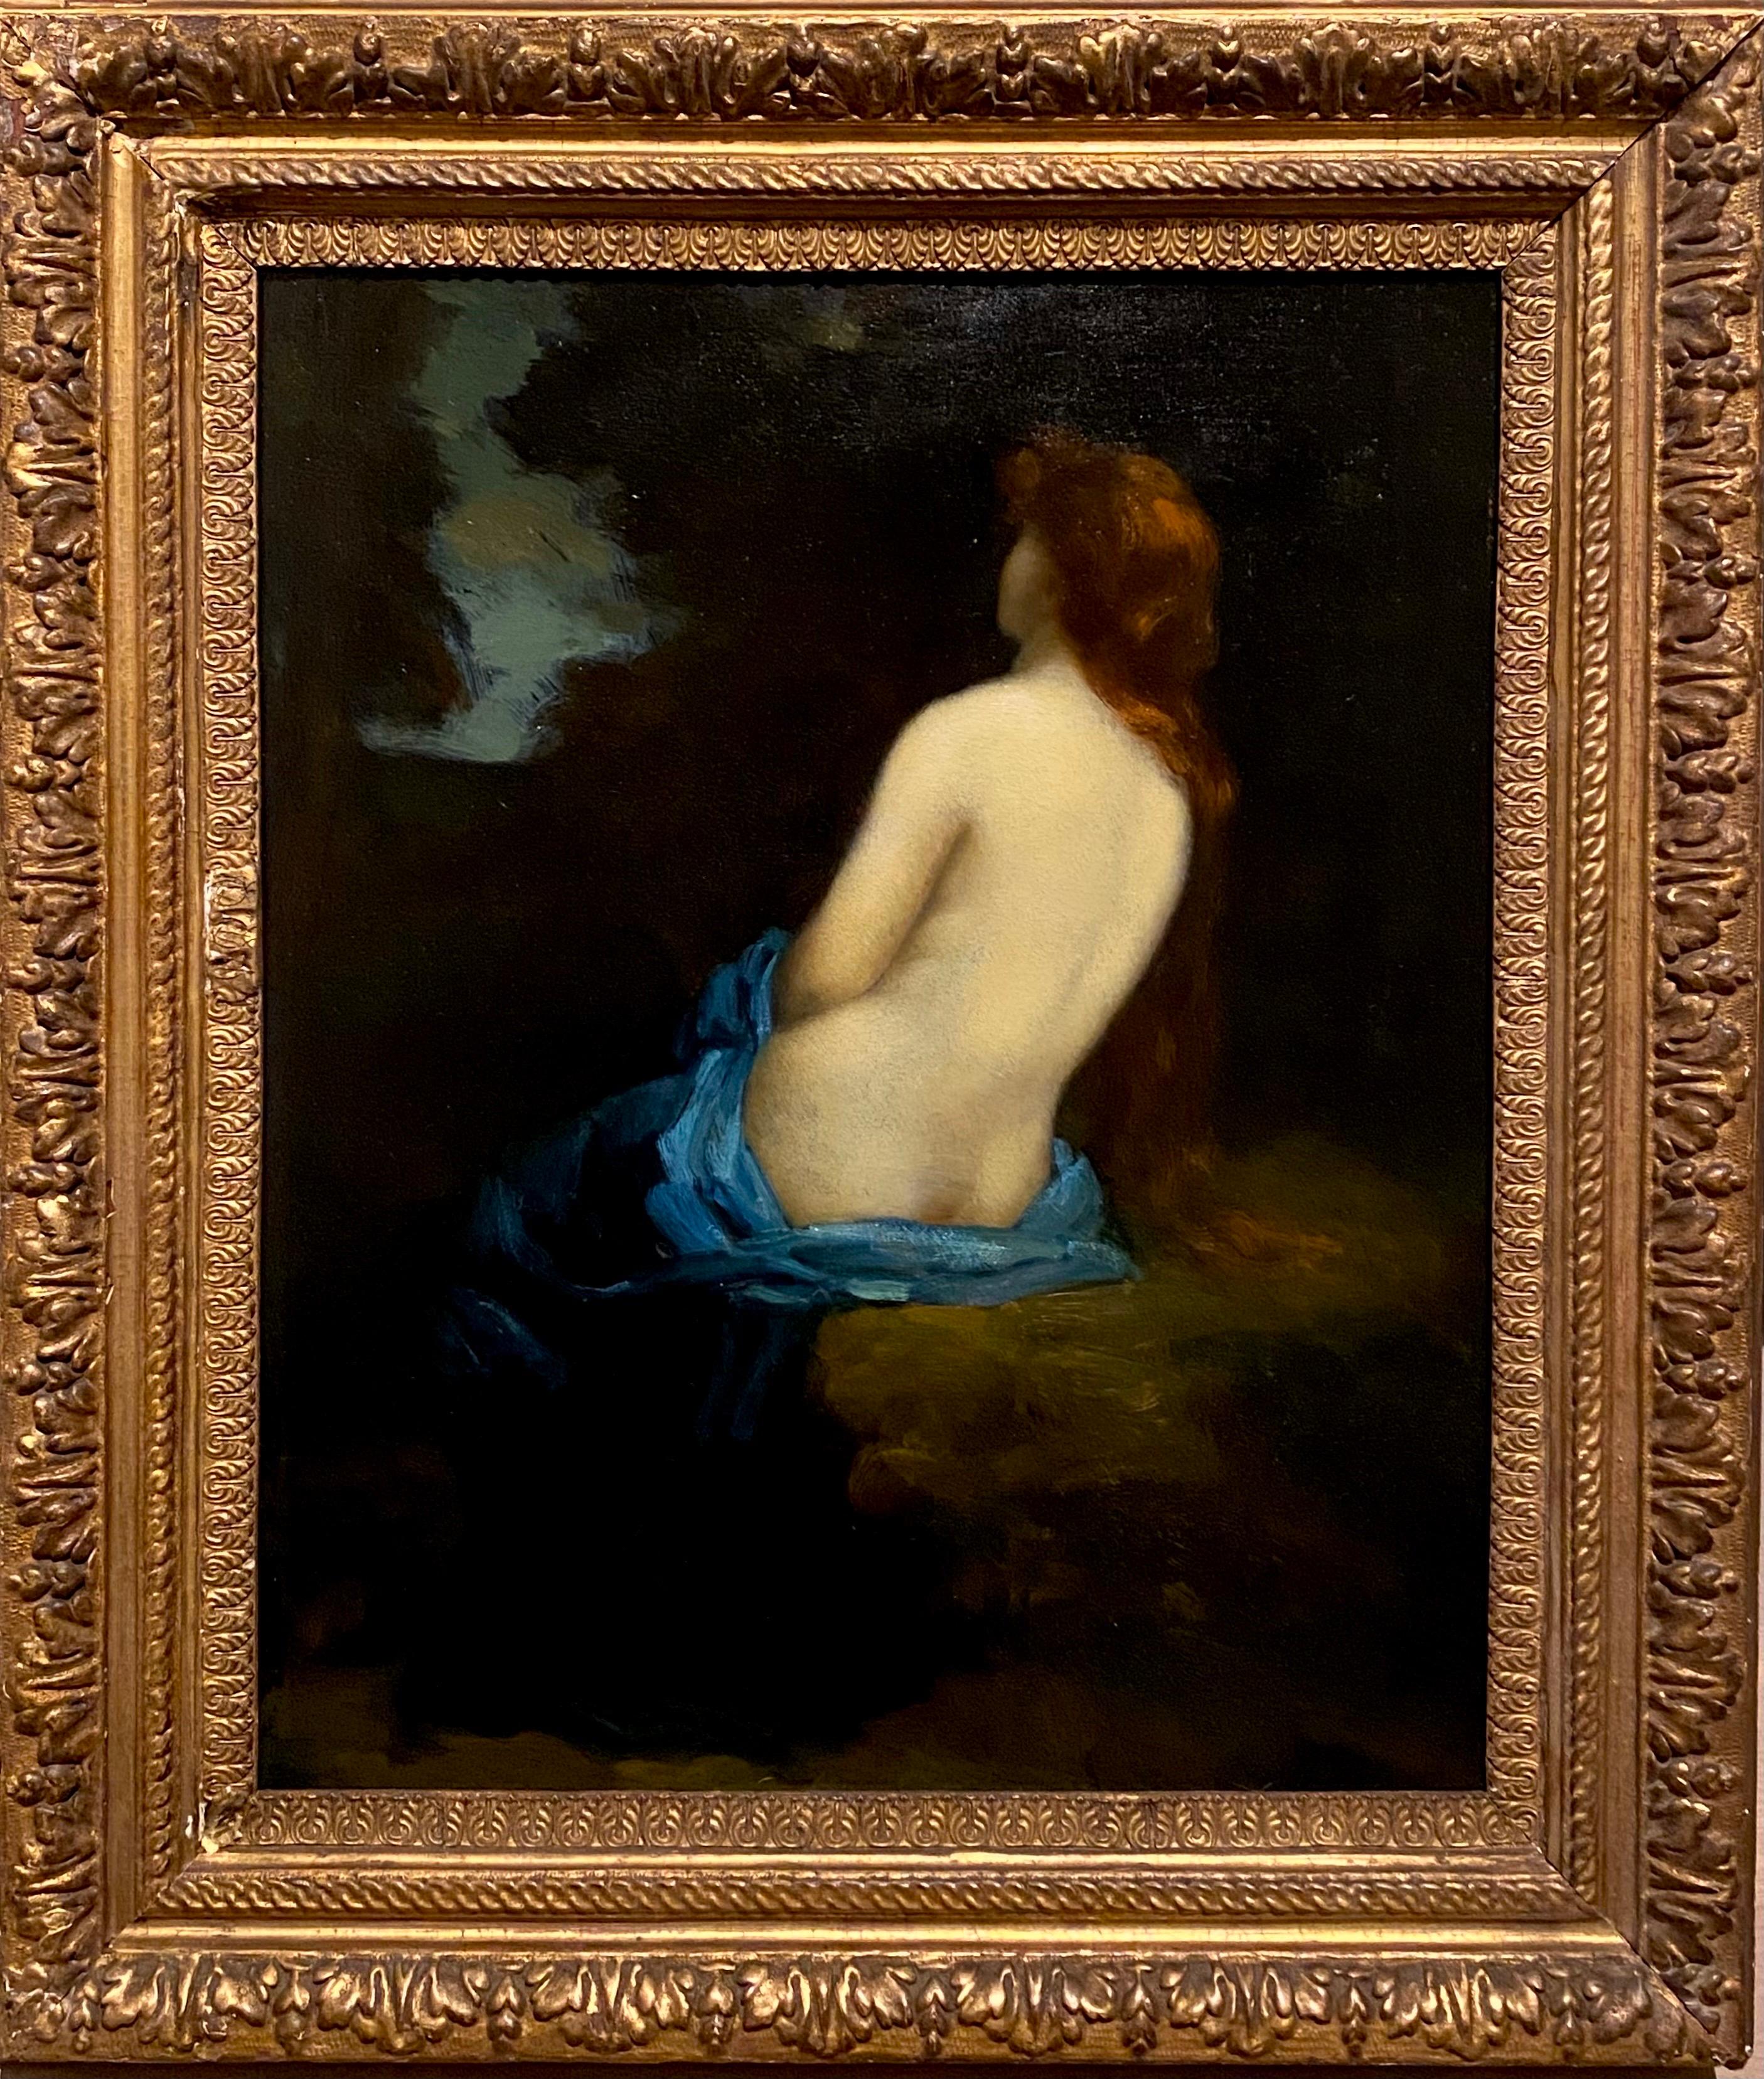 Jean-Jacques Henner Figurative Painting - 19th century French Barbizon painting - Nude in a forest - Henner